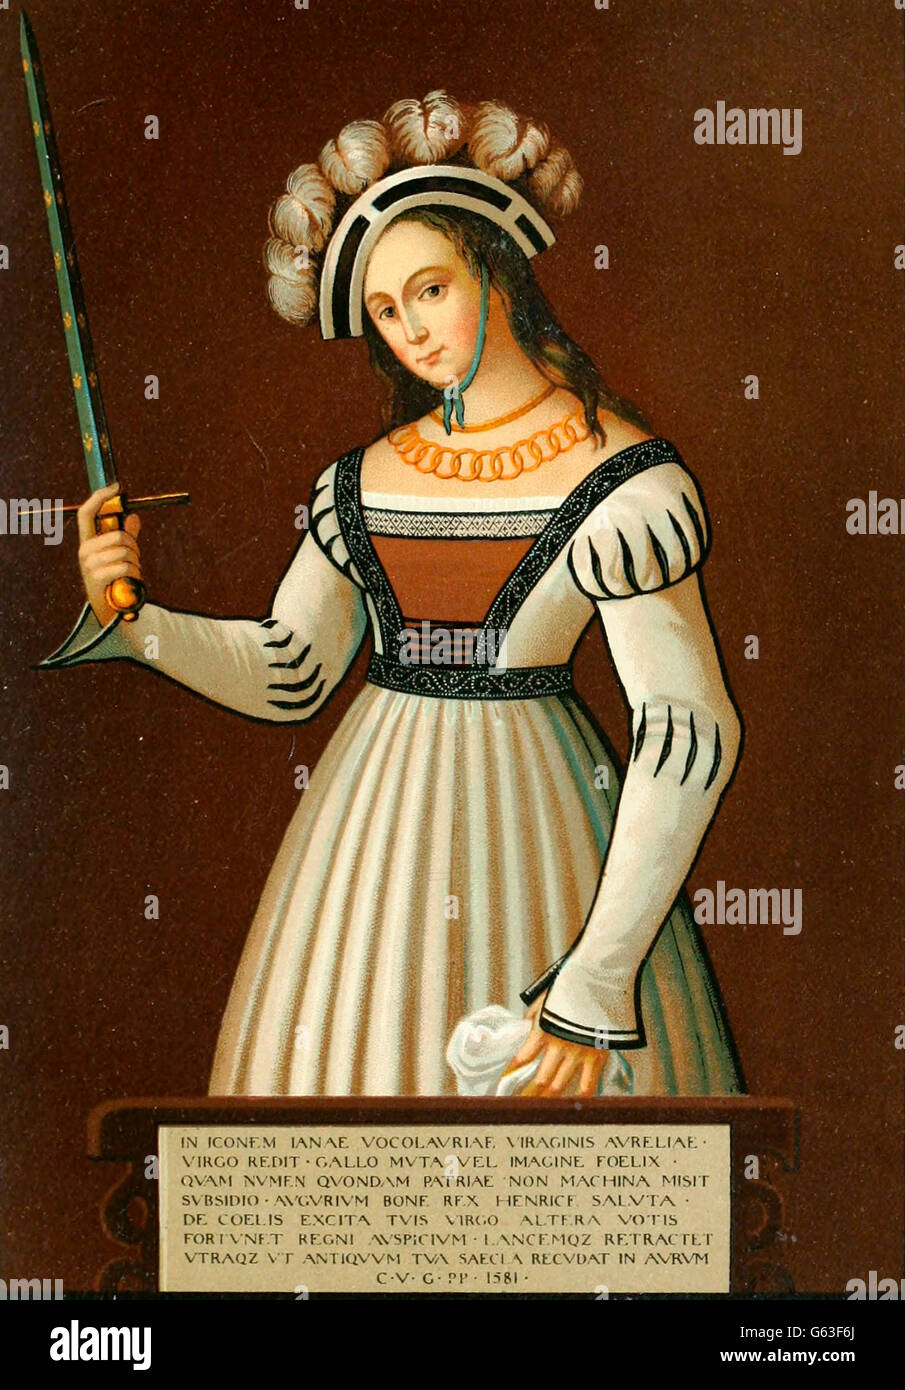 Joan of Arc, The Maid of Orleans Stock Photo